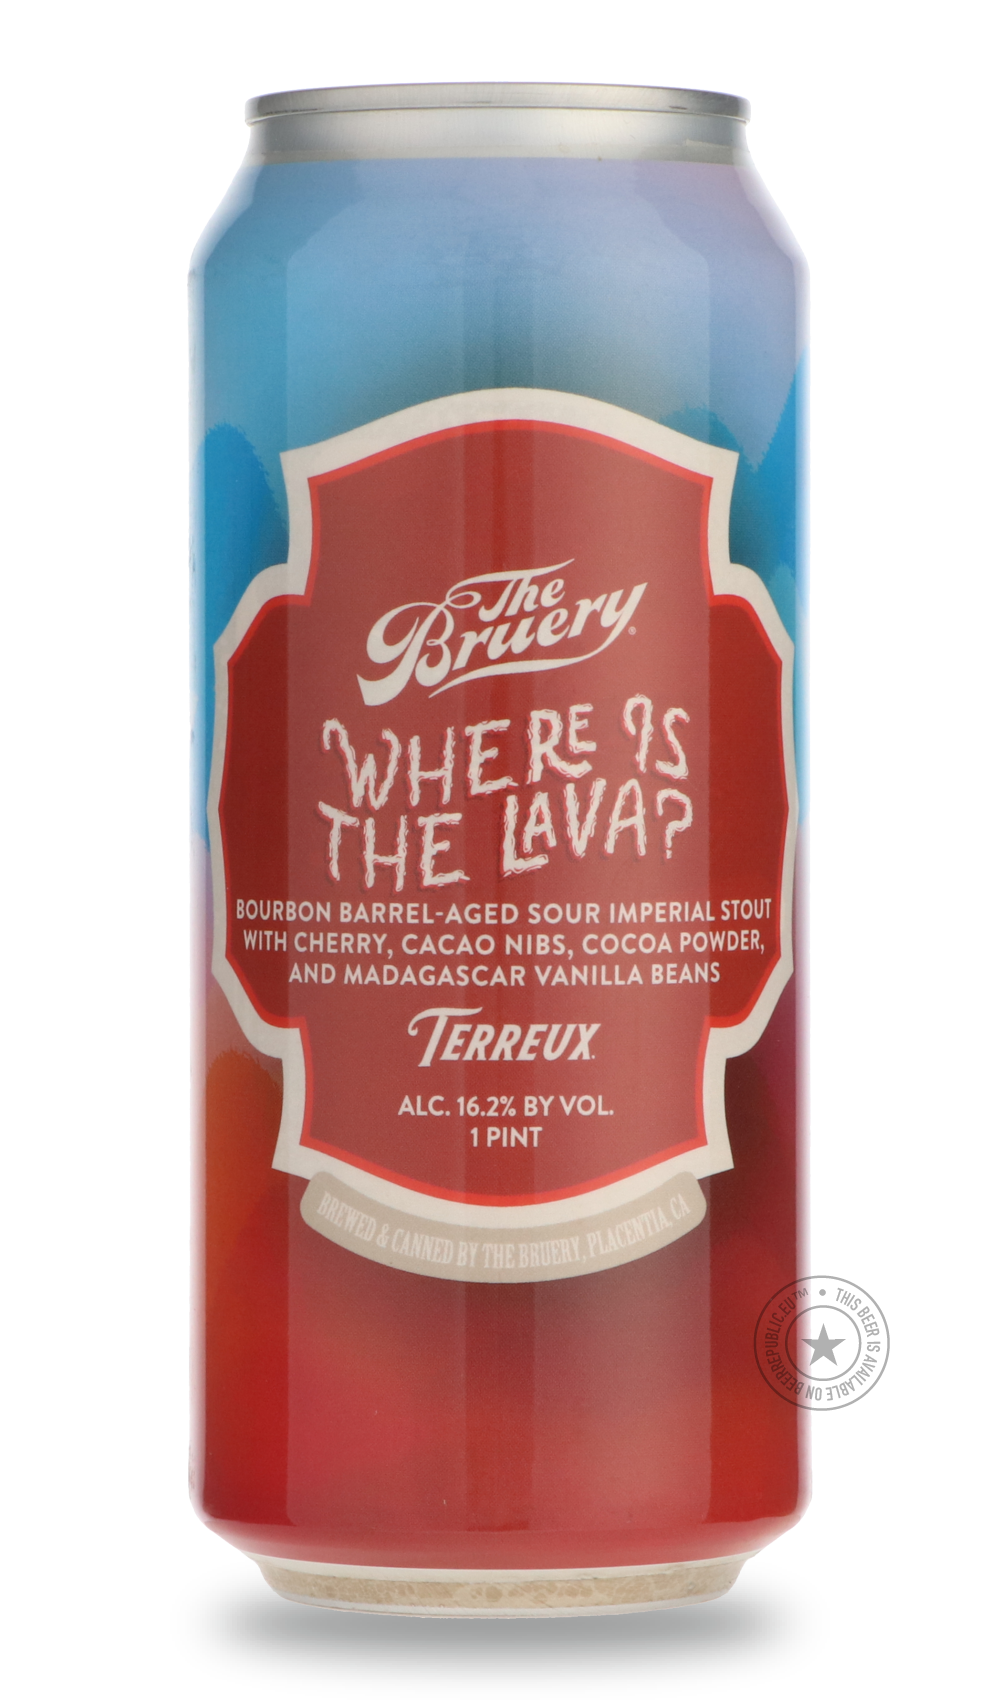 -The Bruery- Terreux Where Is the Lava?-Sour / Wild & Fruity- Only @ Beer Republic - The best online beer store for American & Canadian craft beer - Buy beer online from the USA and Canada - Bier online kopen - Amerikaans bier kopen - Craft beer store - Craft beer kopen - Amerikanisch bier kaufen - Bier online kaufen - Acheter biere online - IPA - Stout - Porter - New England IPA - Hazy IPA - Imperial Stout - Barrel Aged - Barrel Aged Imperial Stout - Brown - Dark beer - Blond - Blonde - Pilsner - Lager - W